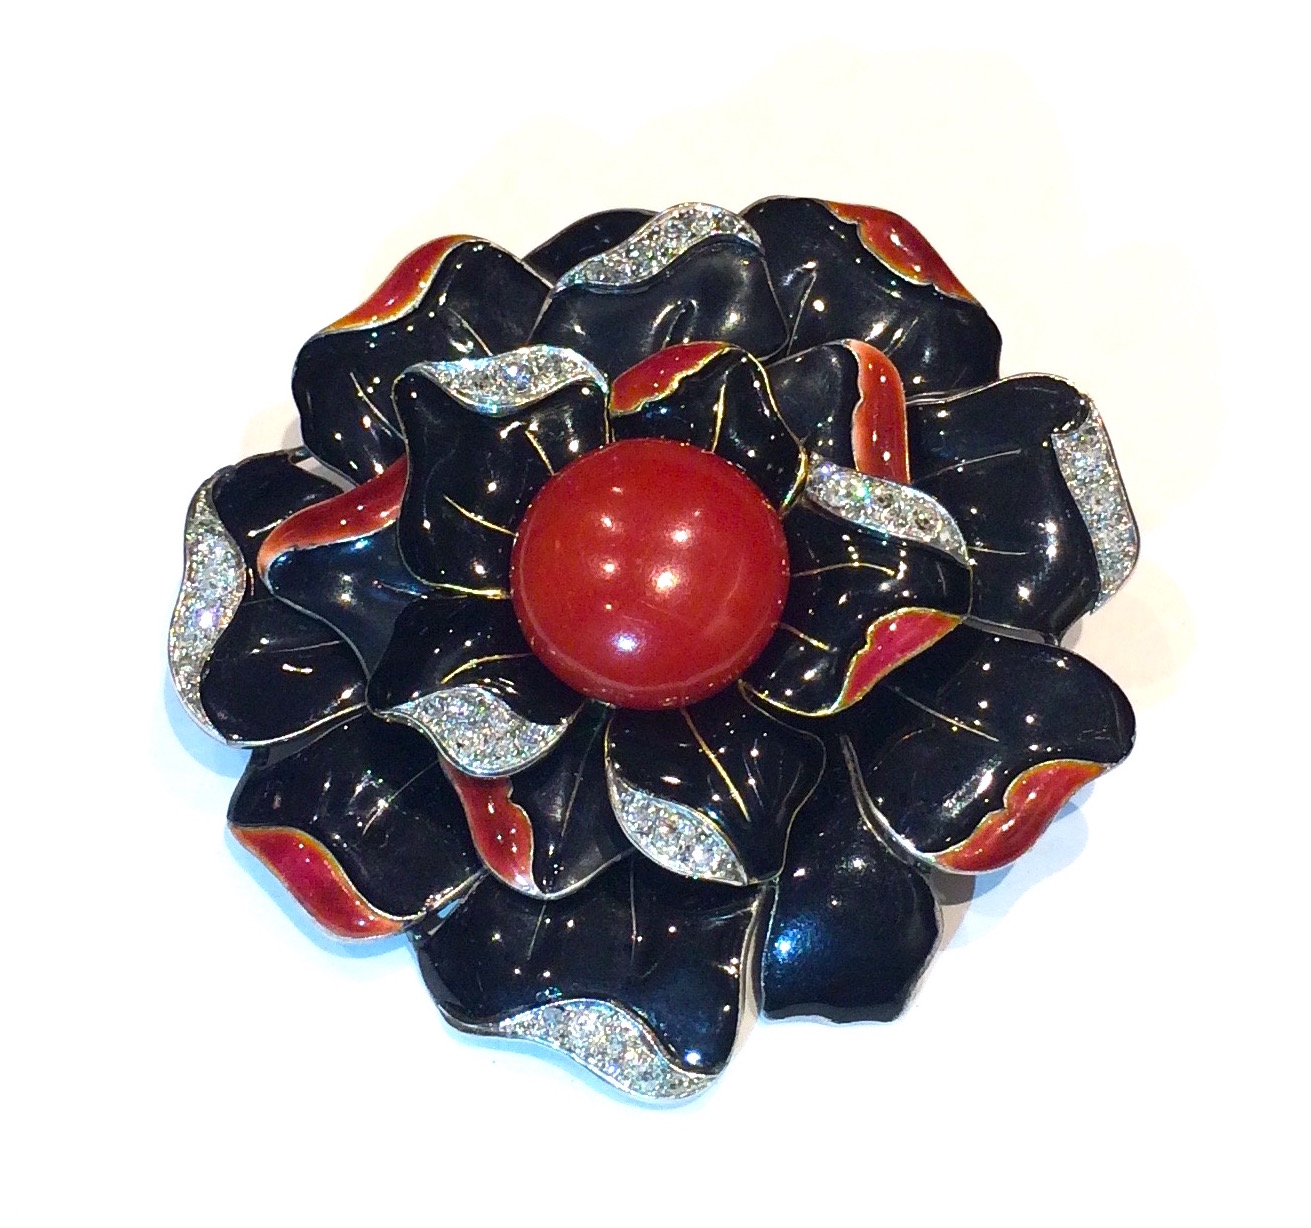 Madame Berlioz and Monsieur Leroy, Paris (Place Vendome, 19 Rue de la Paix active 1920’s through the 1940’s) “Camellia” brooch, black and coral enameled 18k gold further set with diamond pave furled leaf edges set in platinum with a  large red coral central cabochon, signed, c.1920’s